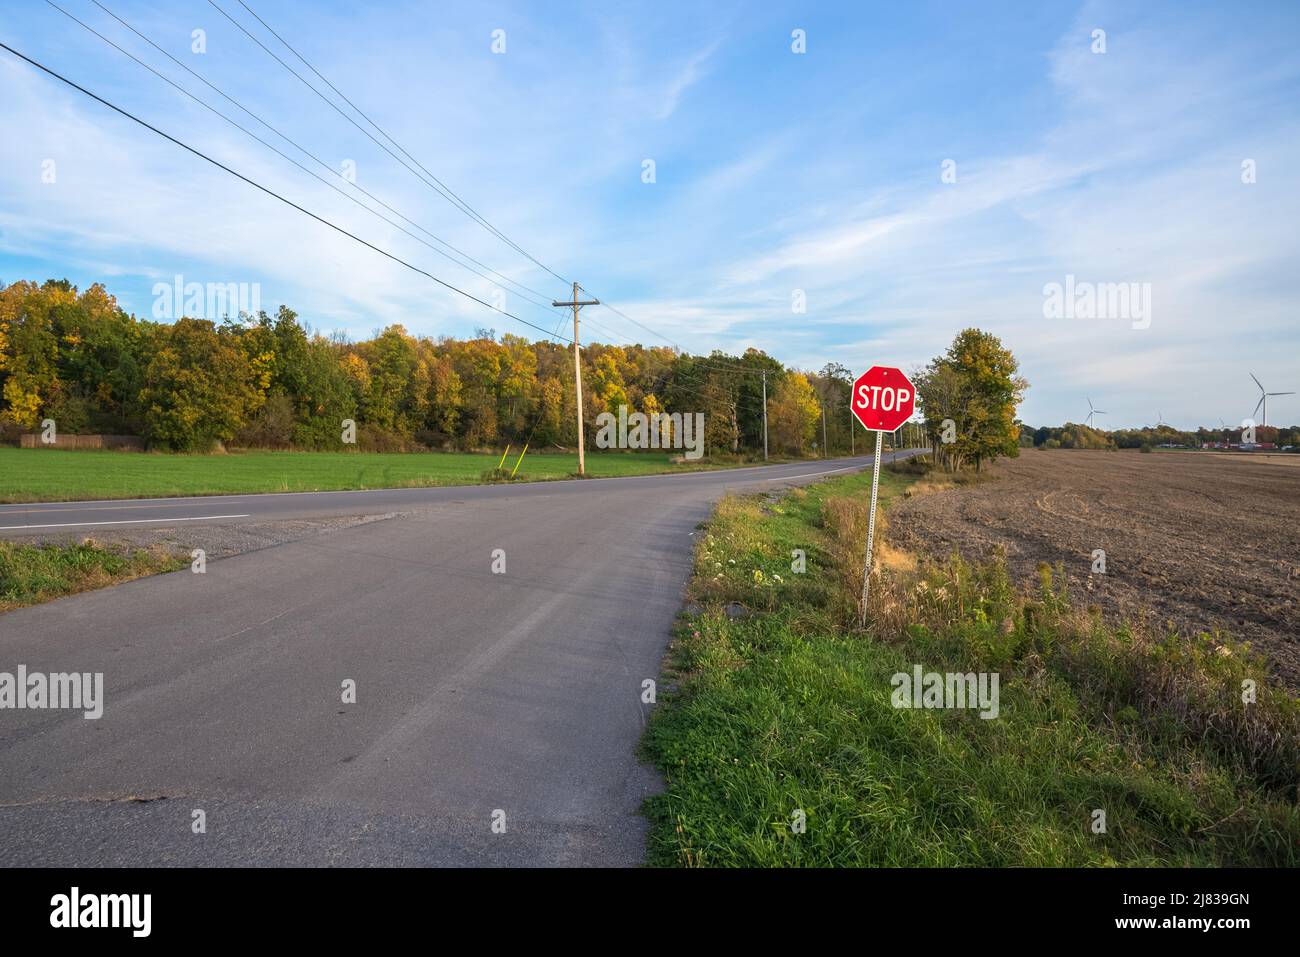 Stop sign at an intersection with a deserted country road at sunset. A wind farm is visible in background. Stock Photo